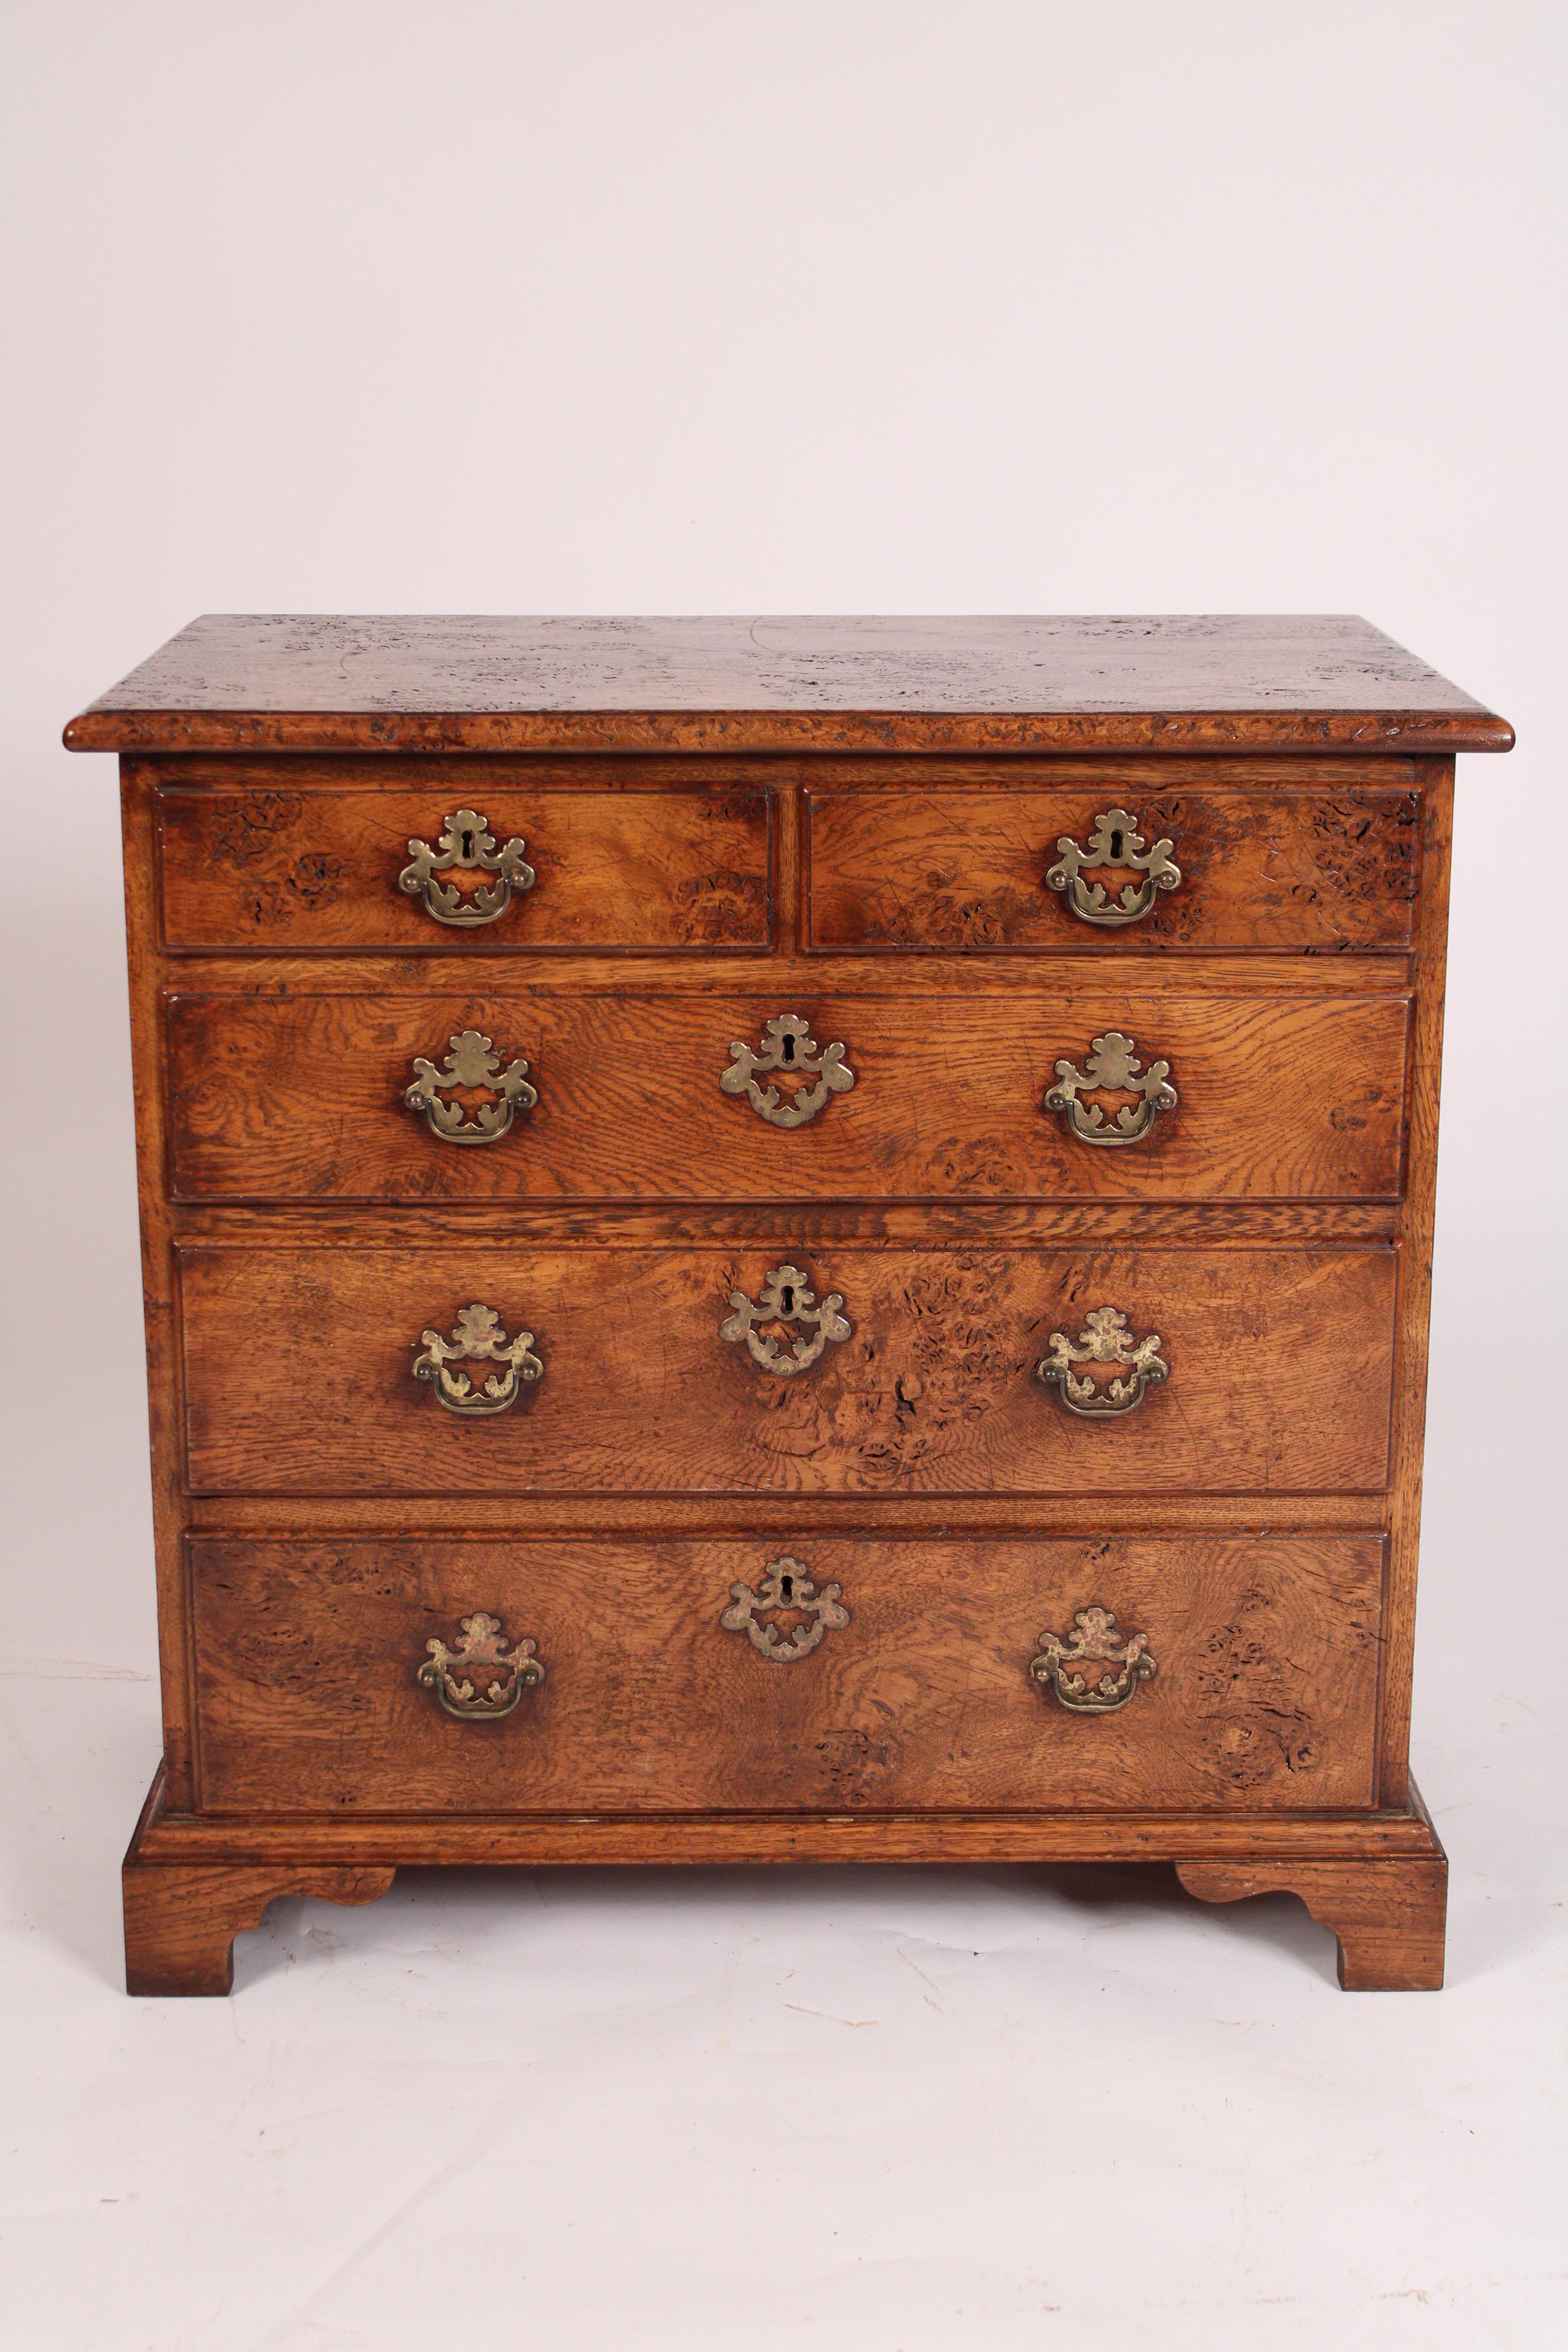 George II style pollard oak chest of drawers with brass hardware, circa 1950. With a single board top with molded front and side edges, two top drawers and three graduated lower drawers resting on bracket feet. Hand dove tailed drawer construction.